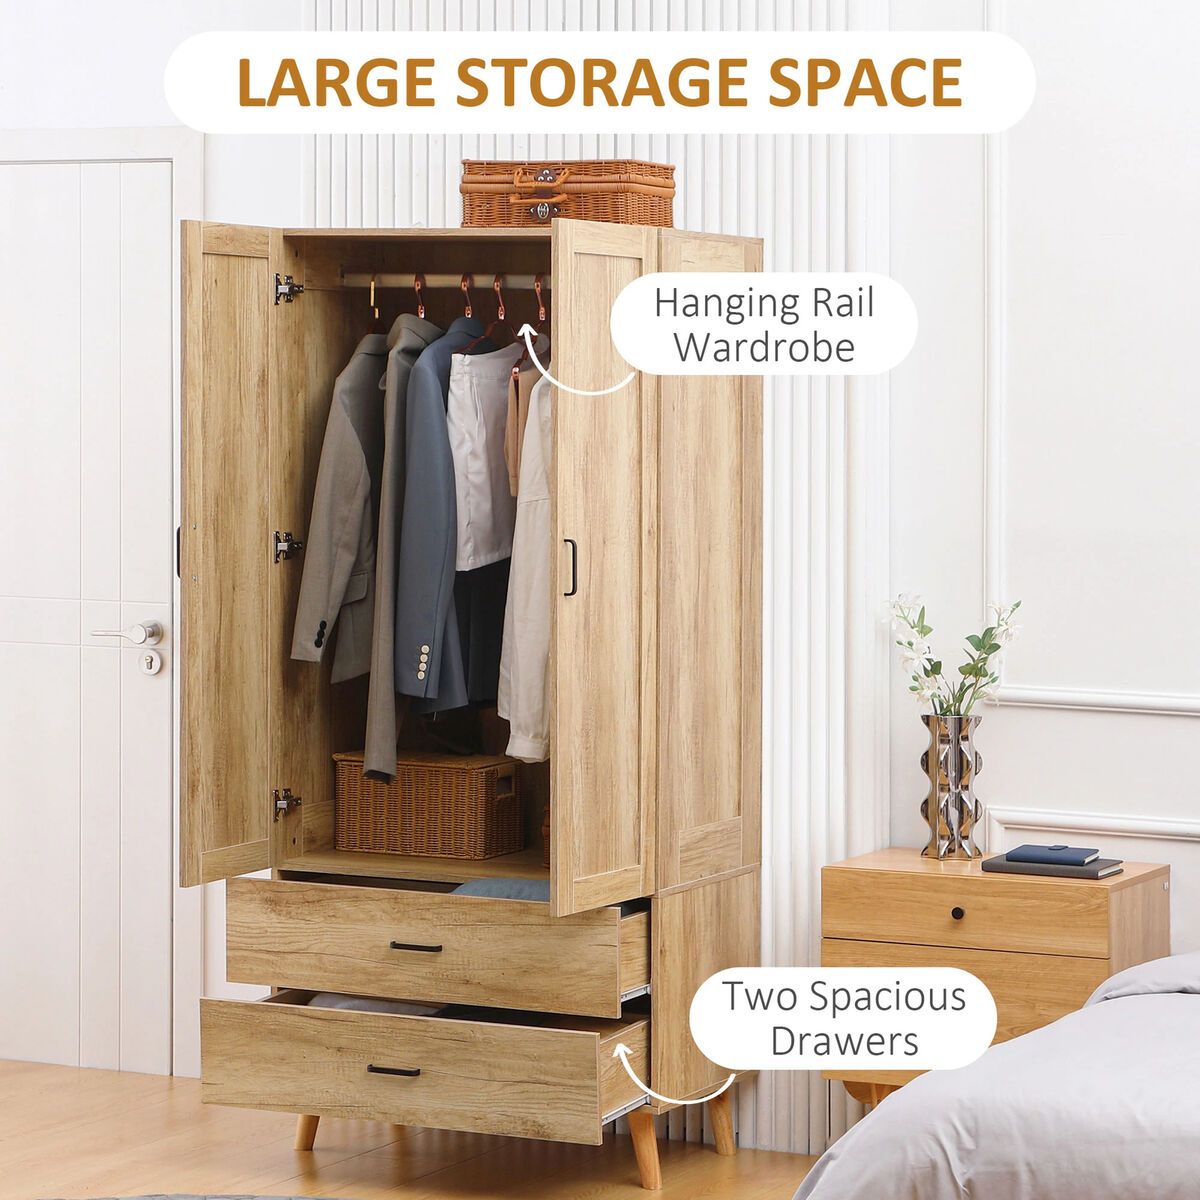 Wooden Wardrobe Double Door Closet Hanging Rail Clothing Storage Organiser  Shelf | Ebay In Wardrobes With Double Hanging Rail (View 9 of 15)